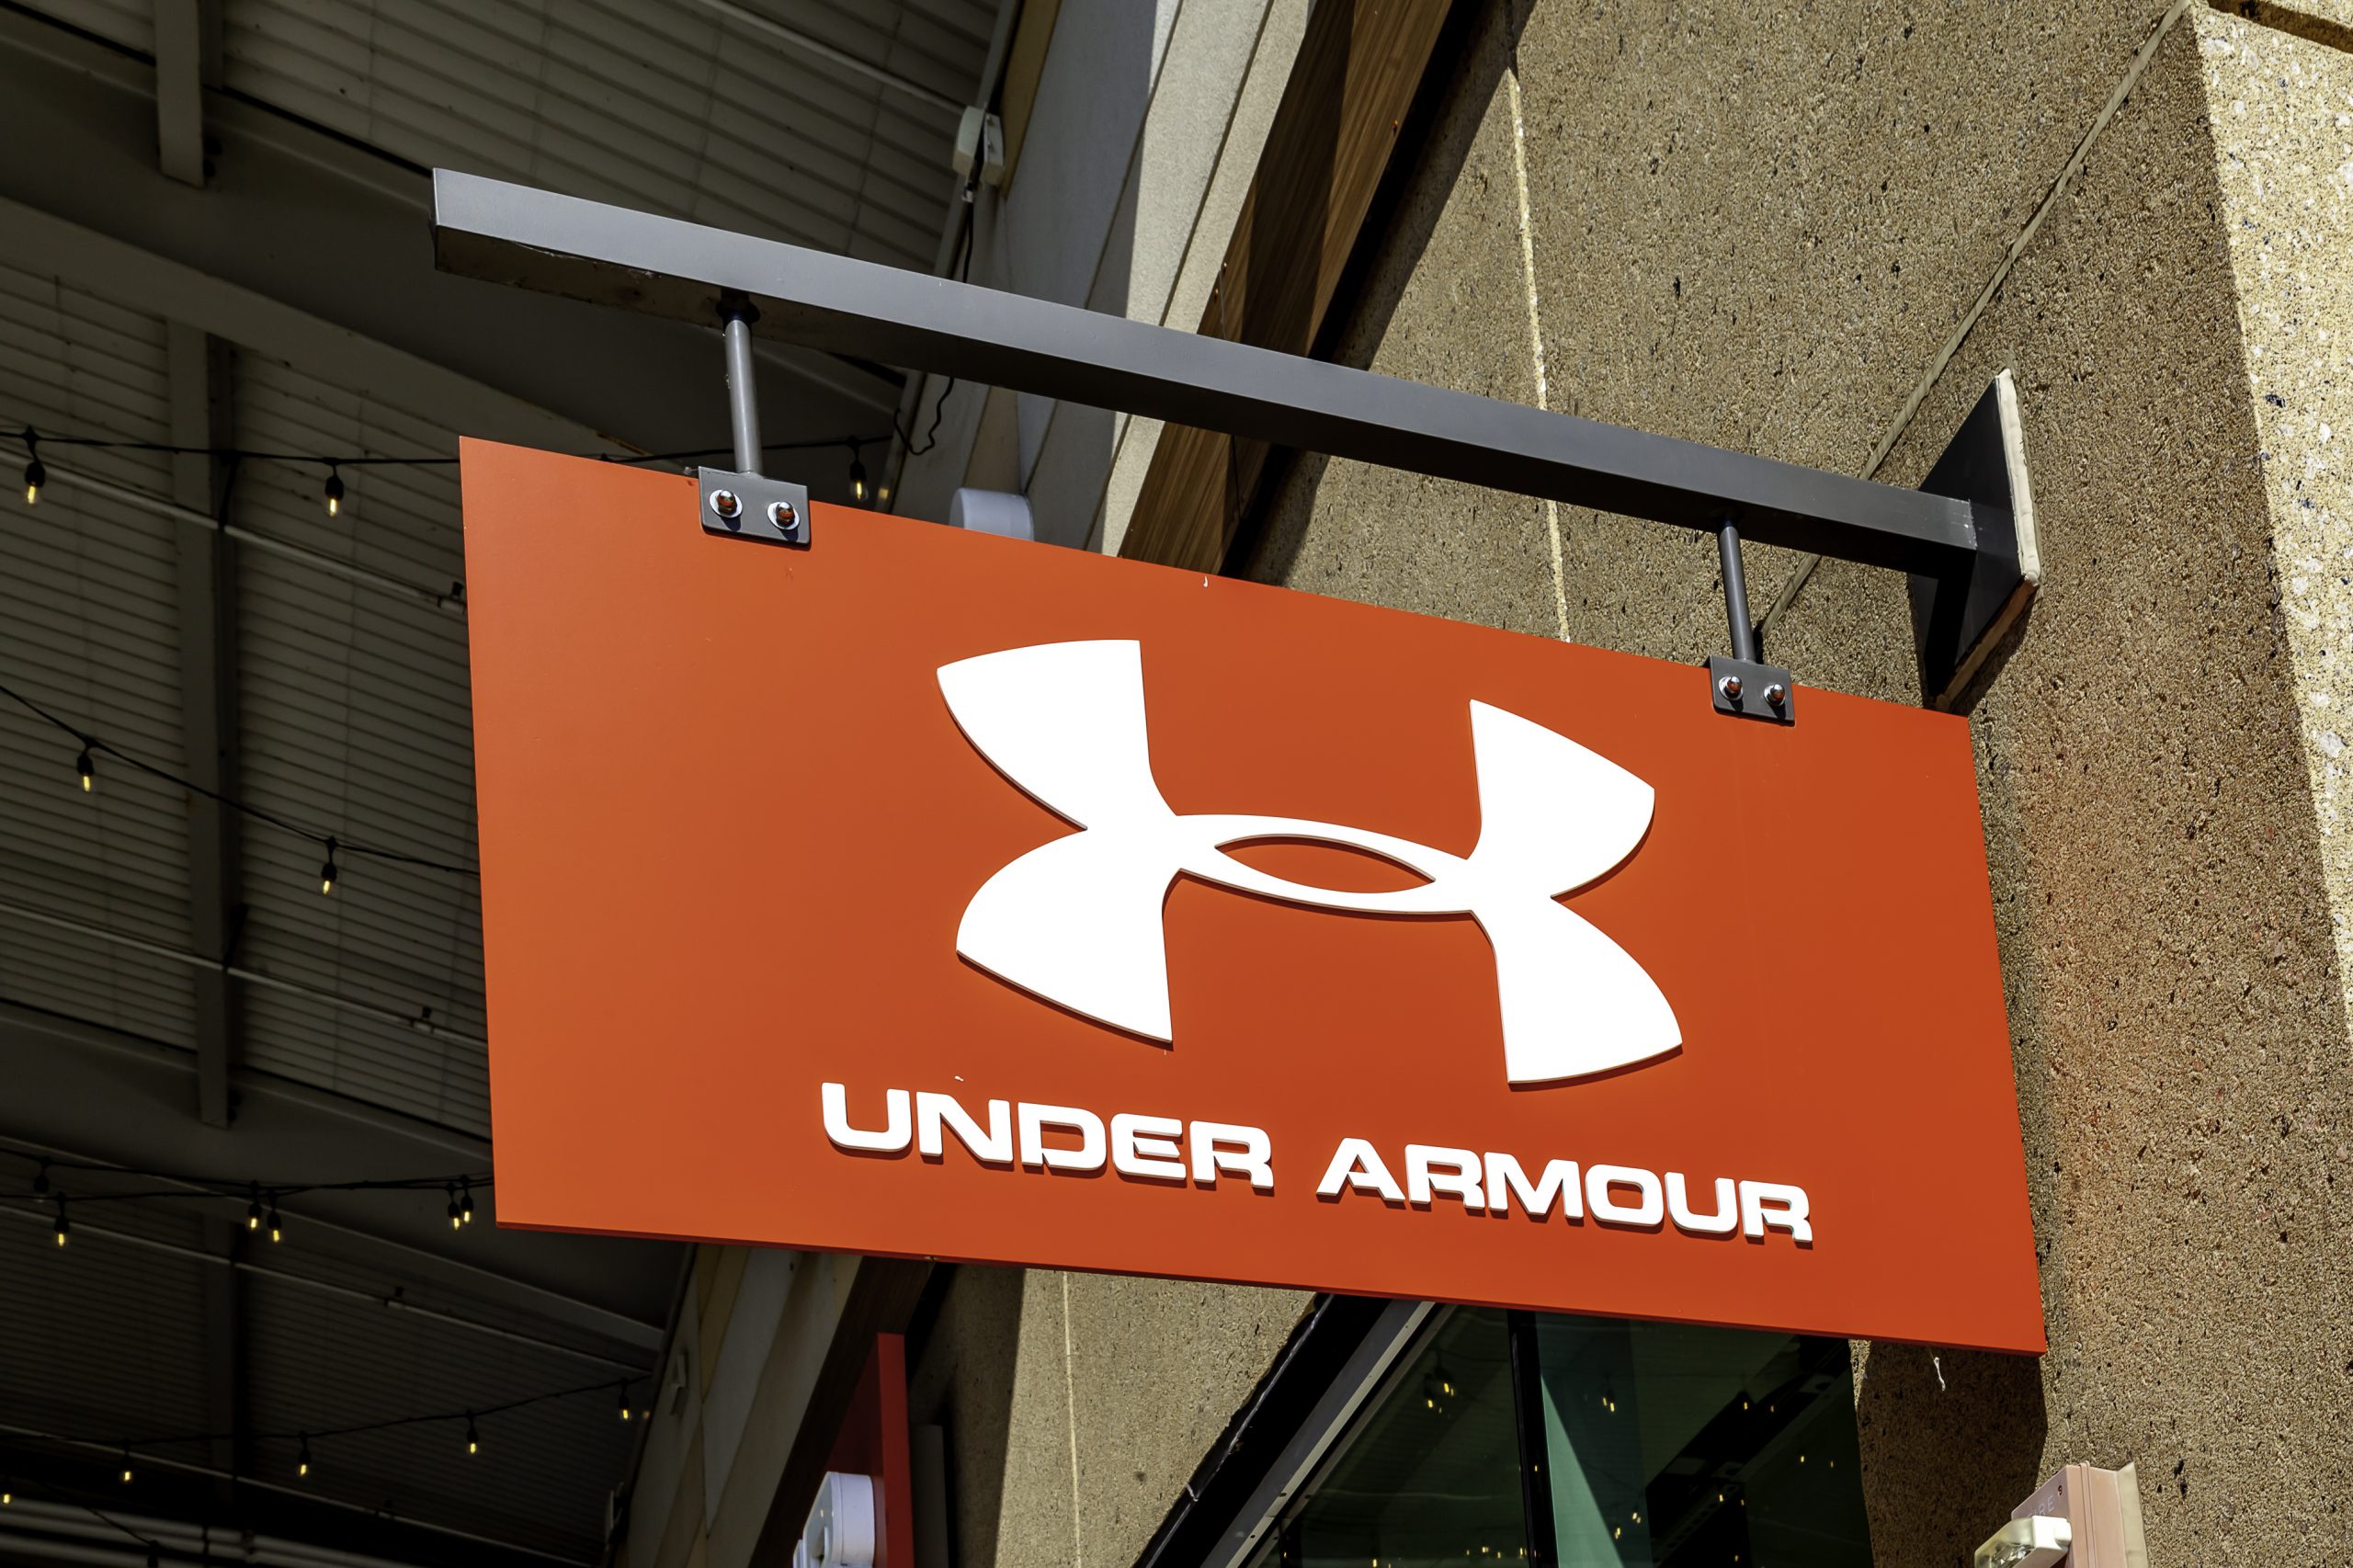 Under Armour is offering 40% off for 